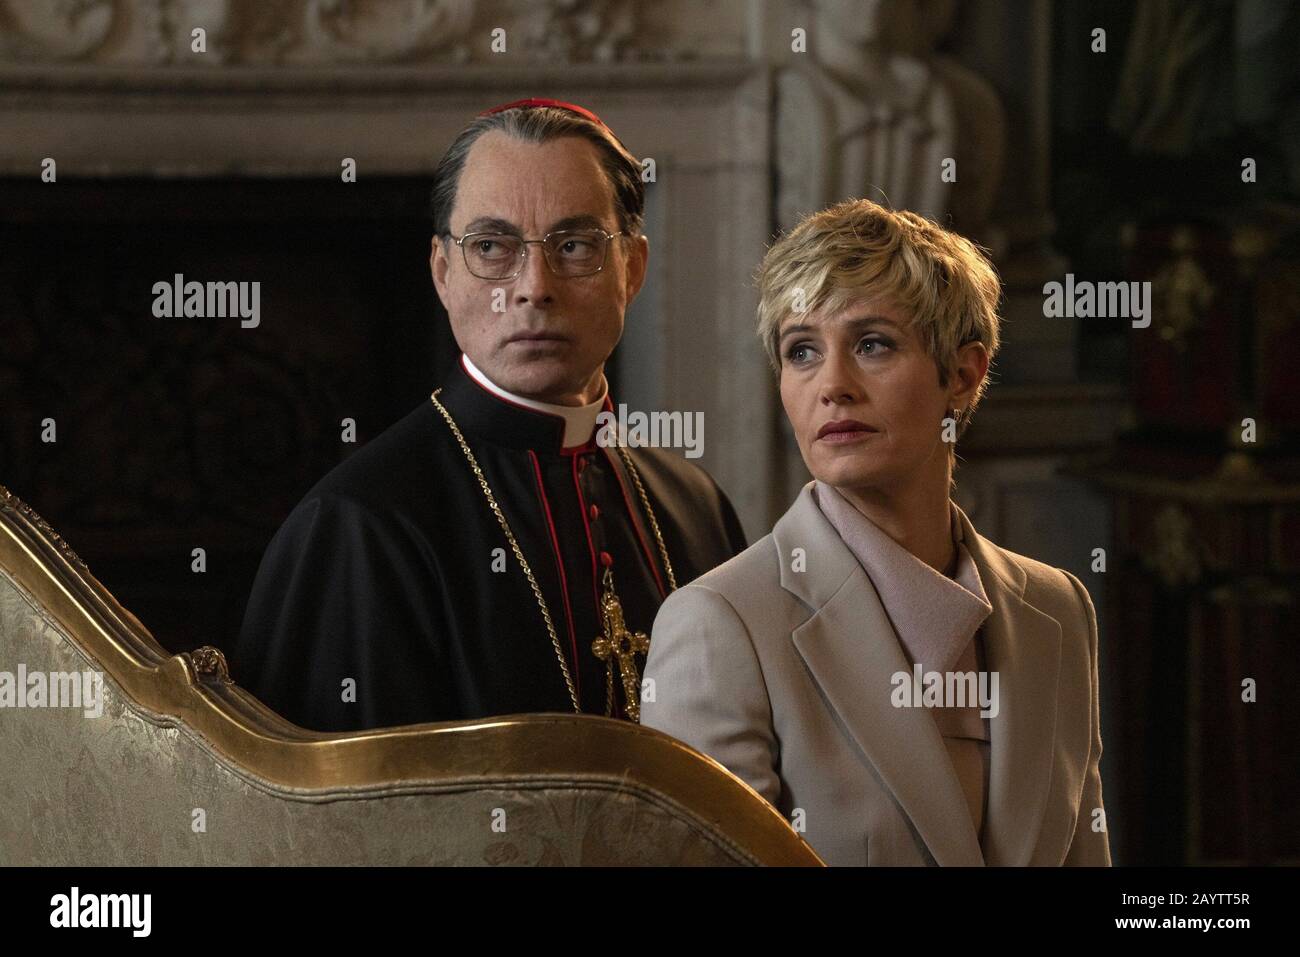 CECILE DE FRANCE and MAURIZIO LOMBARDI in THE NEW POPE (2020), directed by PAOLO SORRENTINO. Credit: WILDSIDE / Album Stock Photo